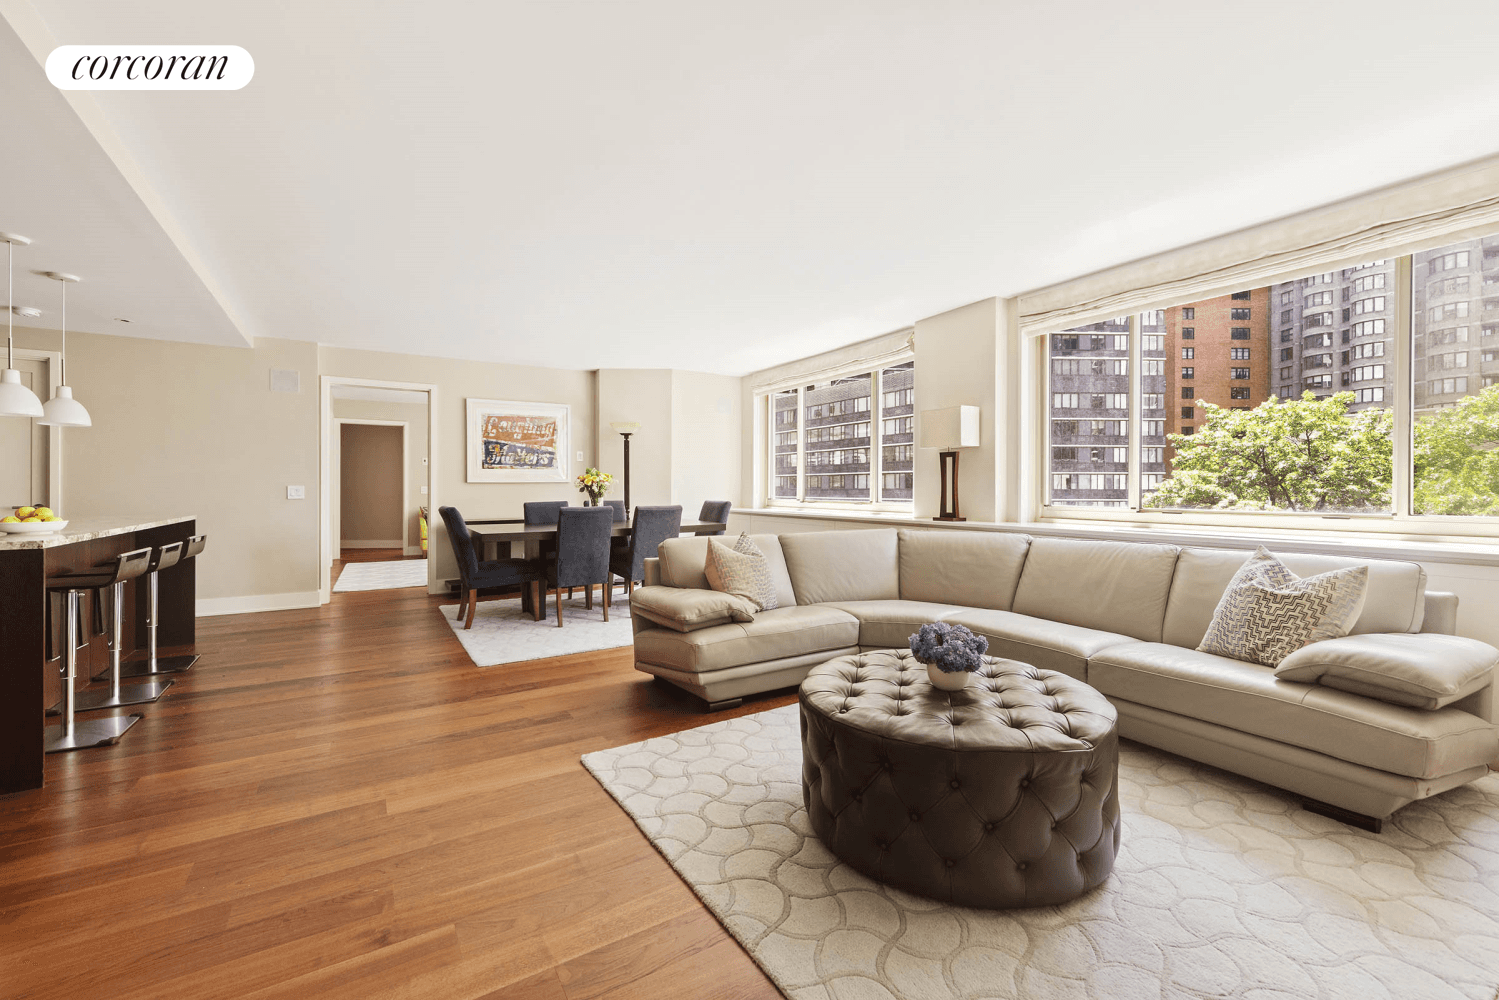 Ideally located on 63rd Street next to Central Park, Apartment 4KLM has been meticulously renovated and combined by world renowned architect Deborah Berke.